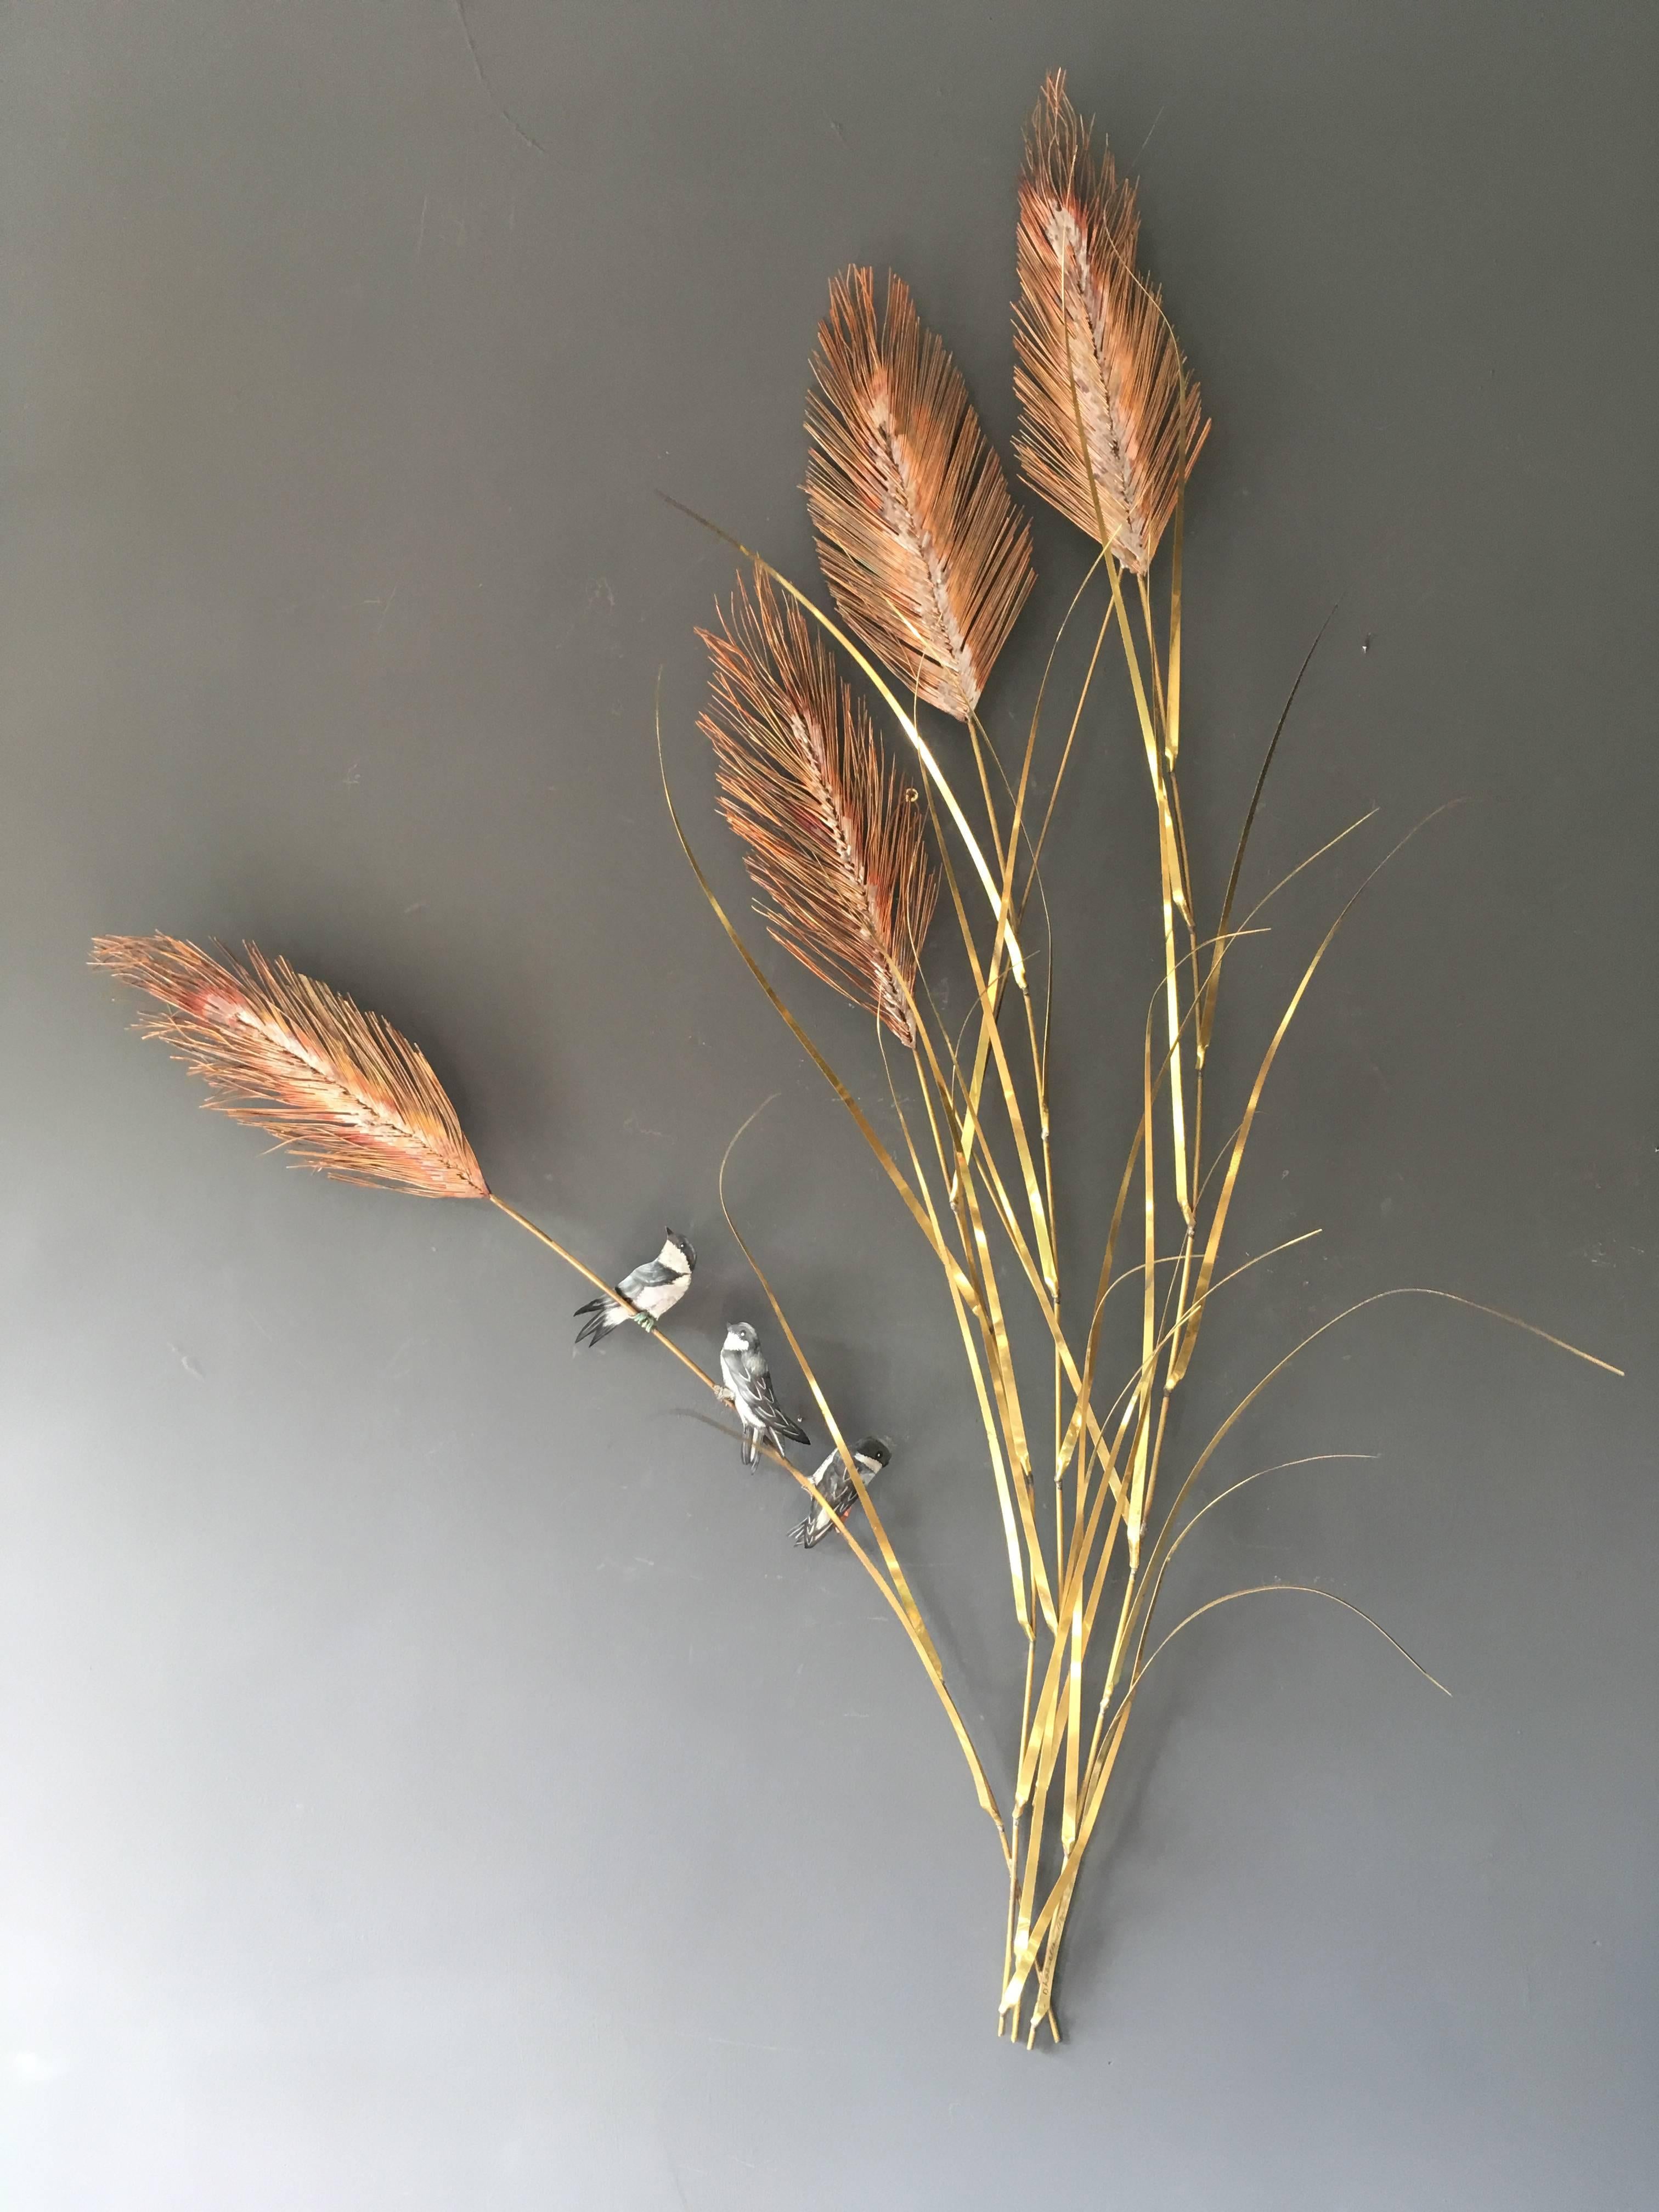 Daniel D'Haeseleer large wall sculpture

The artwork is beautiful and very organic in its shape and movement. The work is 3D and the fine brass grass leaves lean out from the wall in a very natural way

The grass stems and long fine leaves are